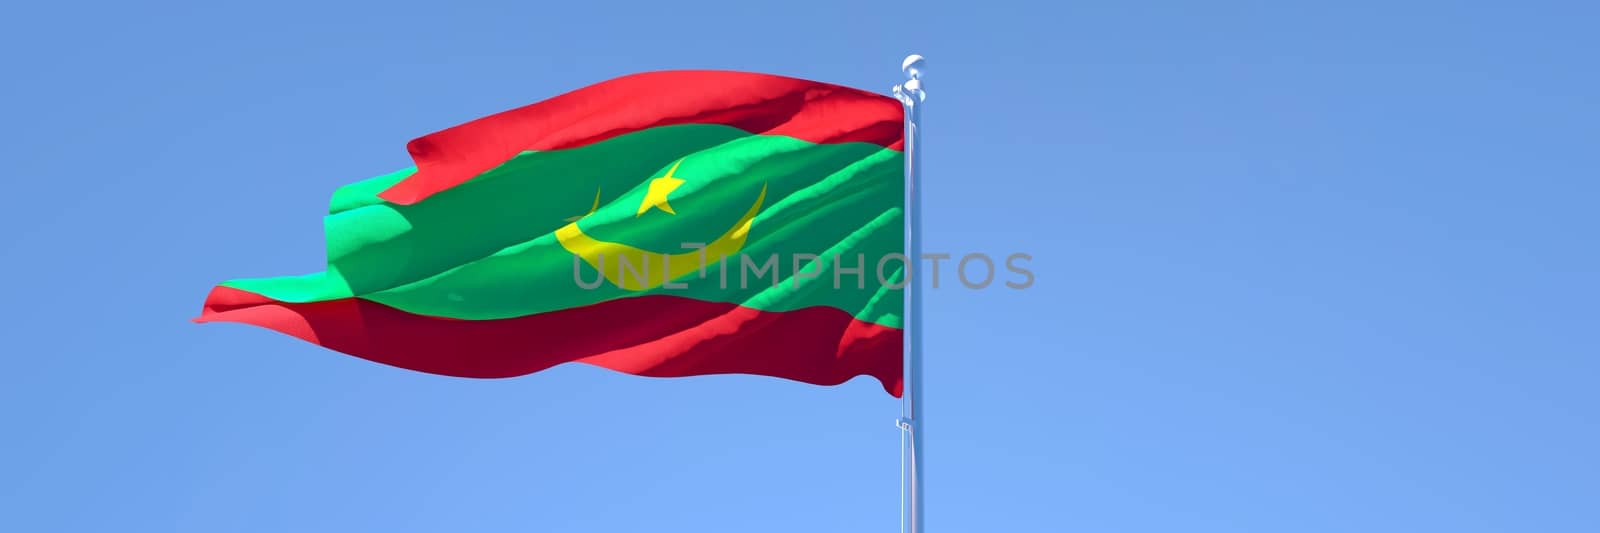 3D rendering of the national flag of Mauritania waving in the wind against a blue sky